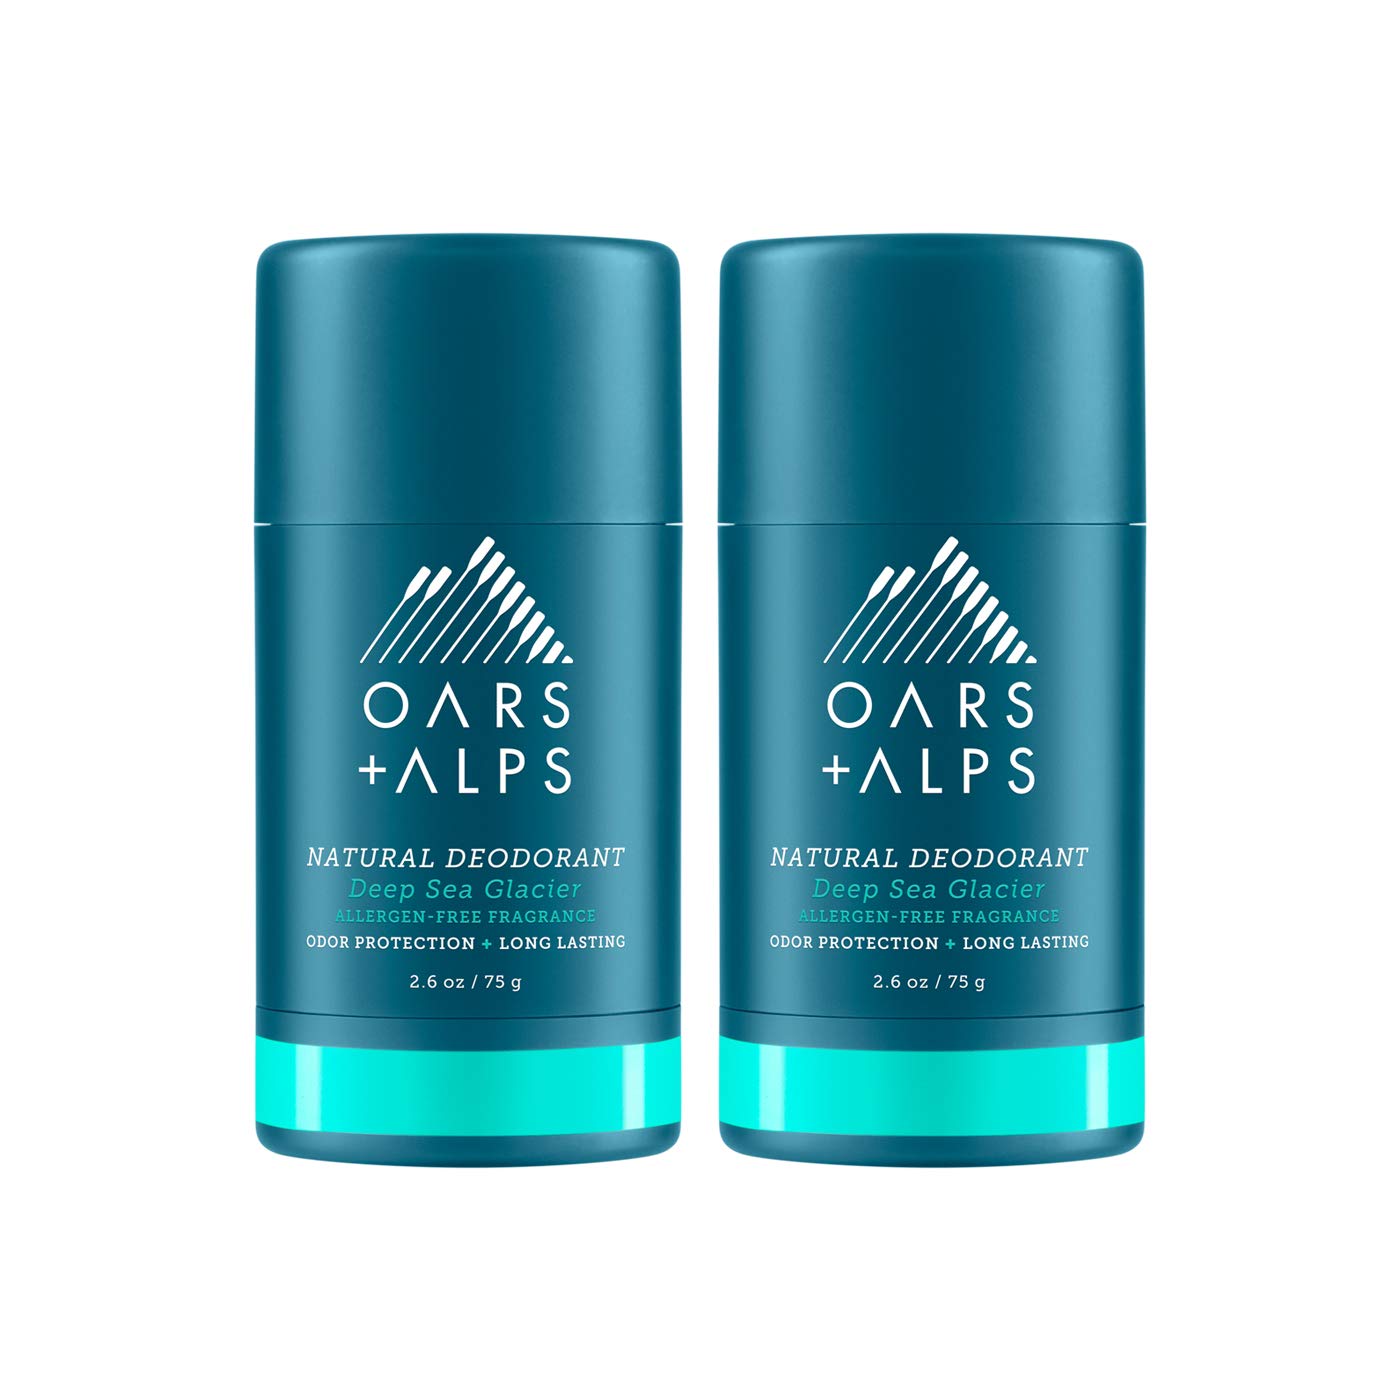 Oars + Alps Aluminum Free Deodorant for Men and Women, Dermatologist Tested, Travel Size, Deep Sea Glacier, 2 Pack, 2.6 Oz Each